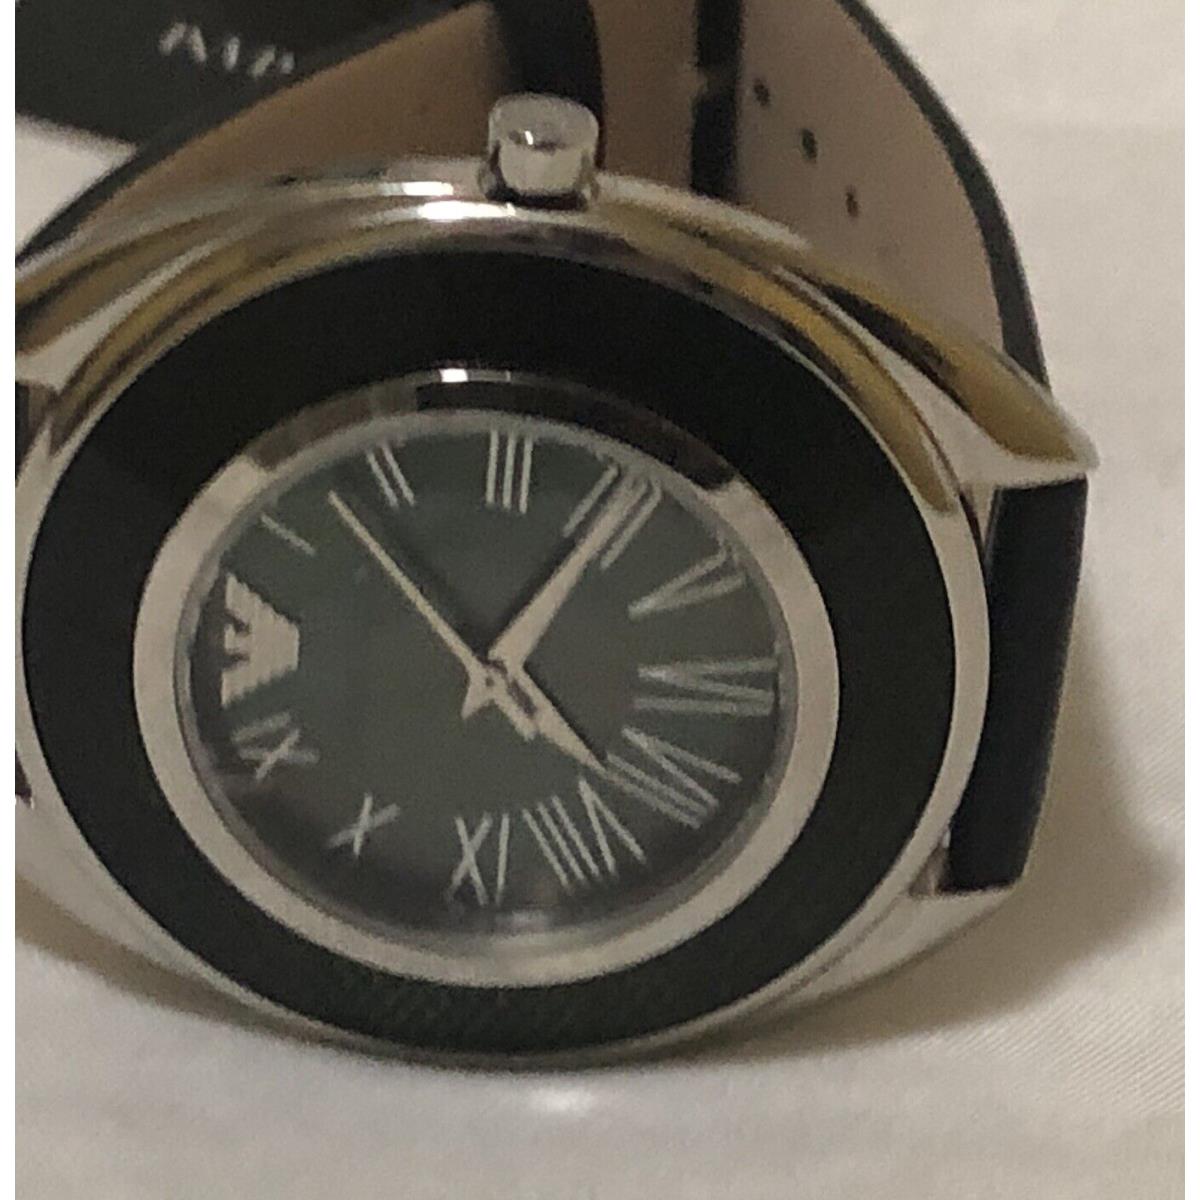 Emporio Armani watch Lily - Black, mother of pearl Dial, Black Band, Silver Bezel 6